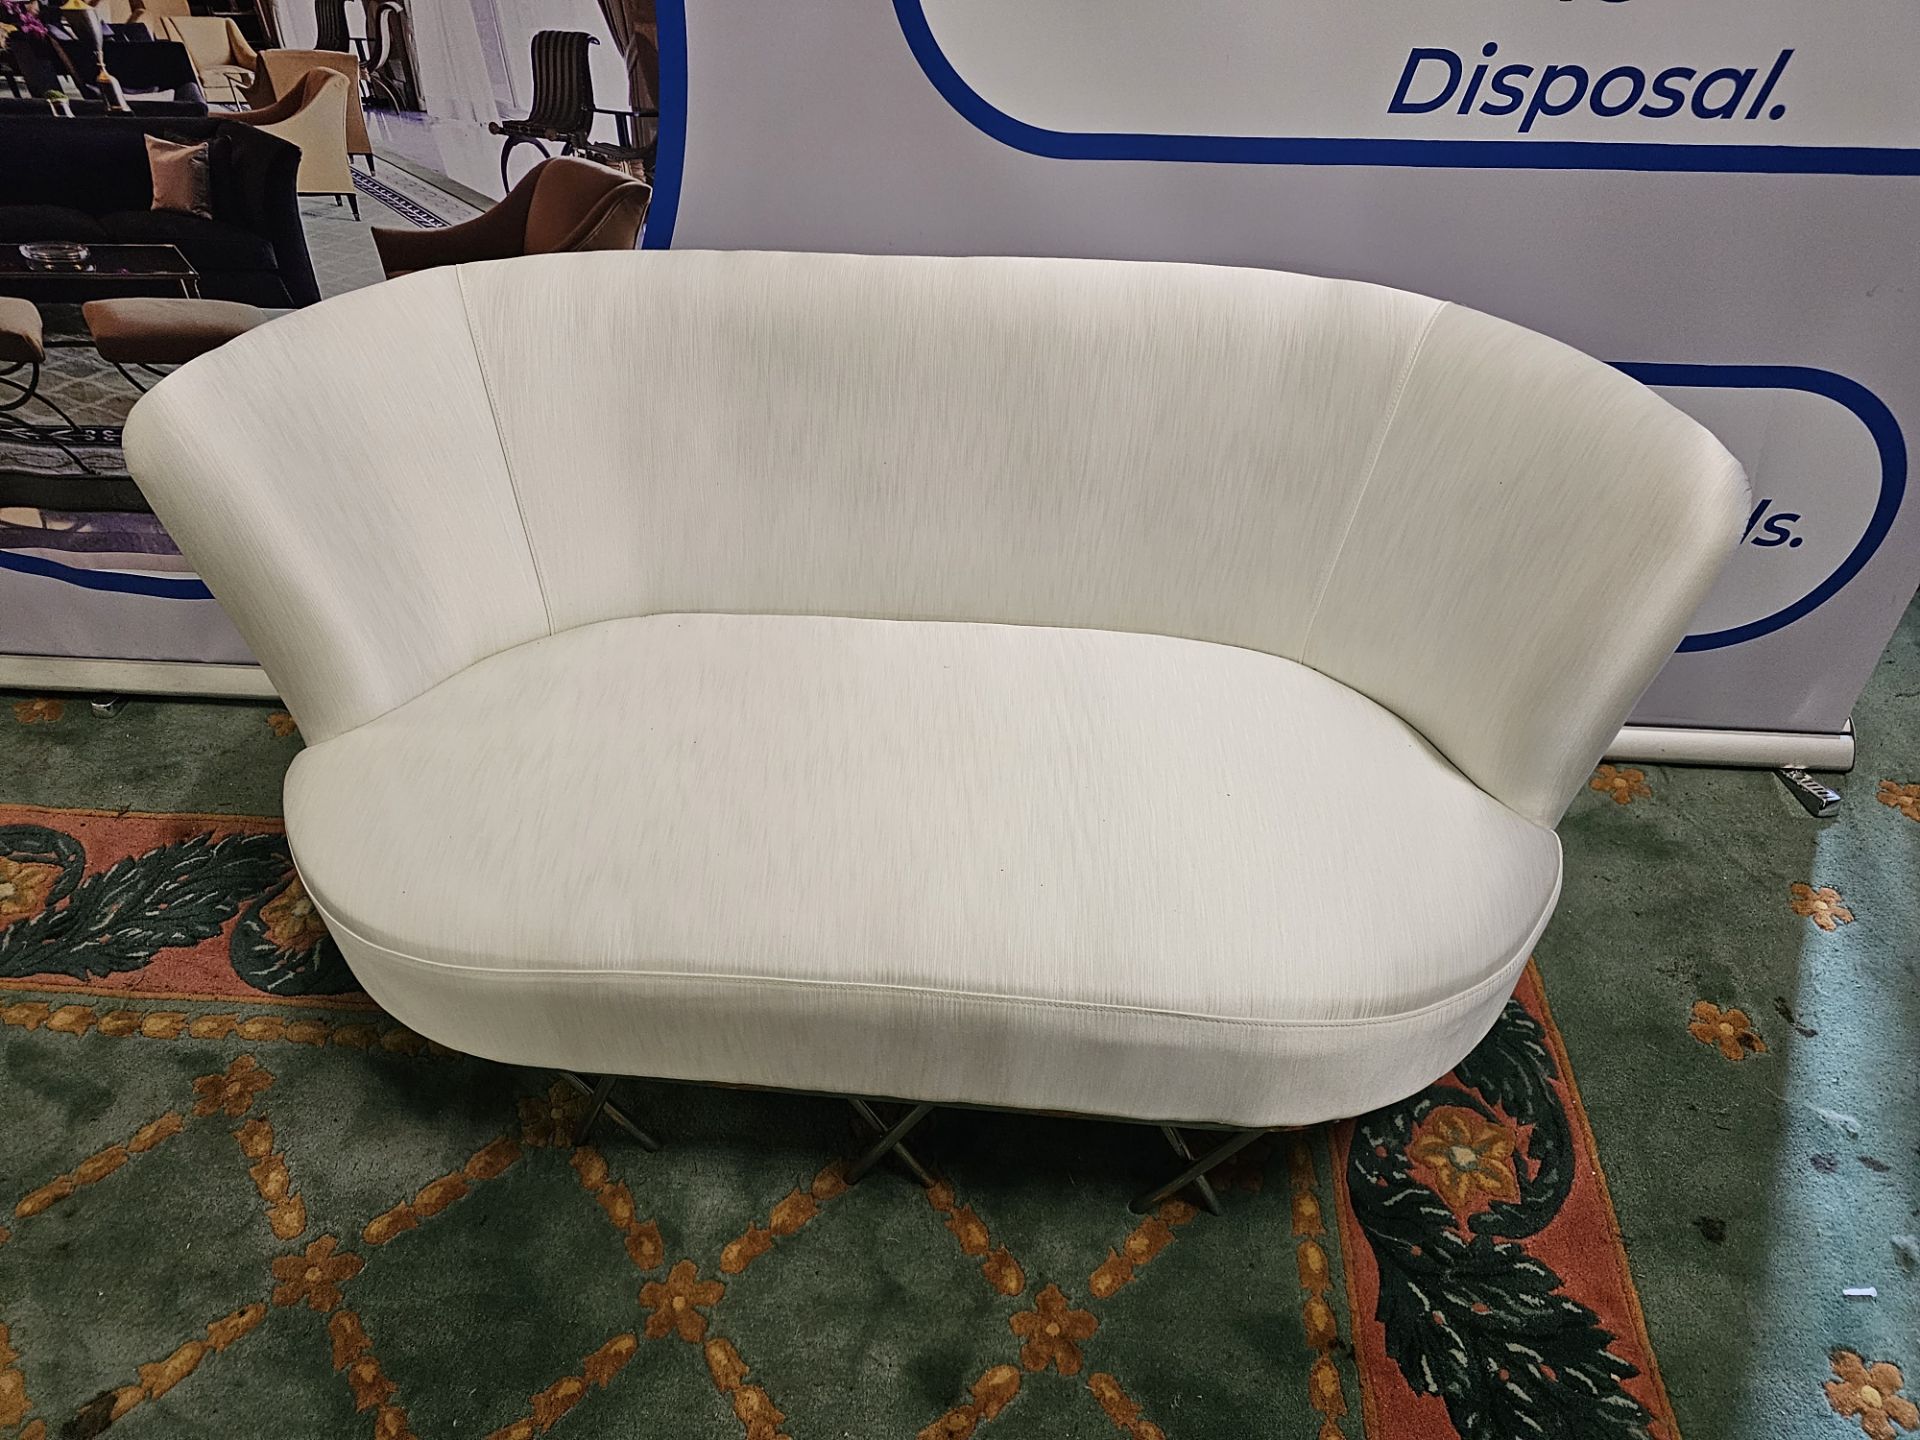 Two Seater Love Seat In A Shiny Oyster White Upholstery On Chrome Feet 155cm x 70cm x 73cm high - Bild 2 aus 10